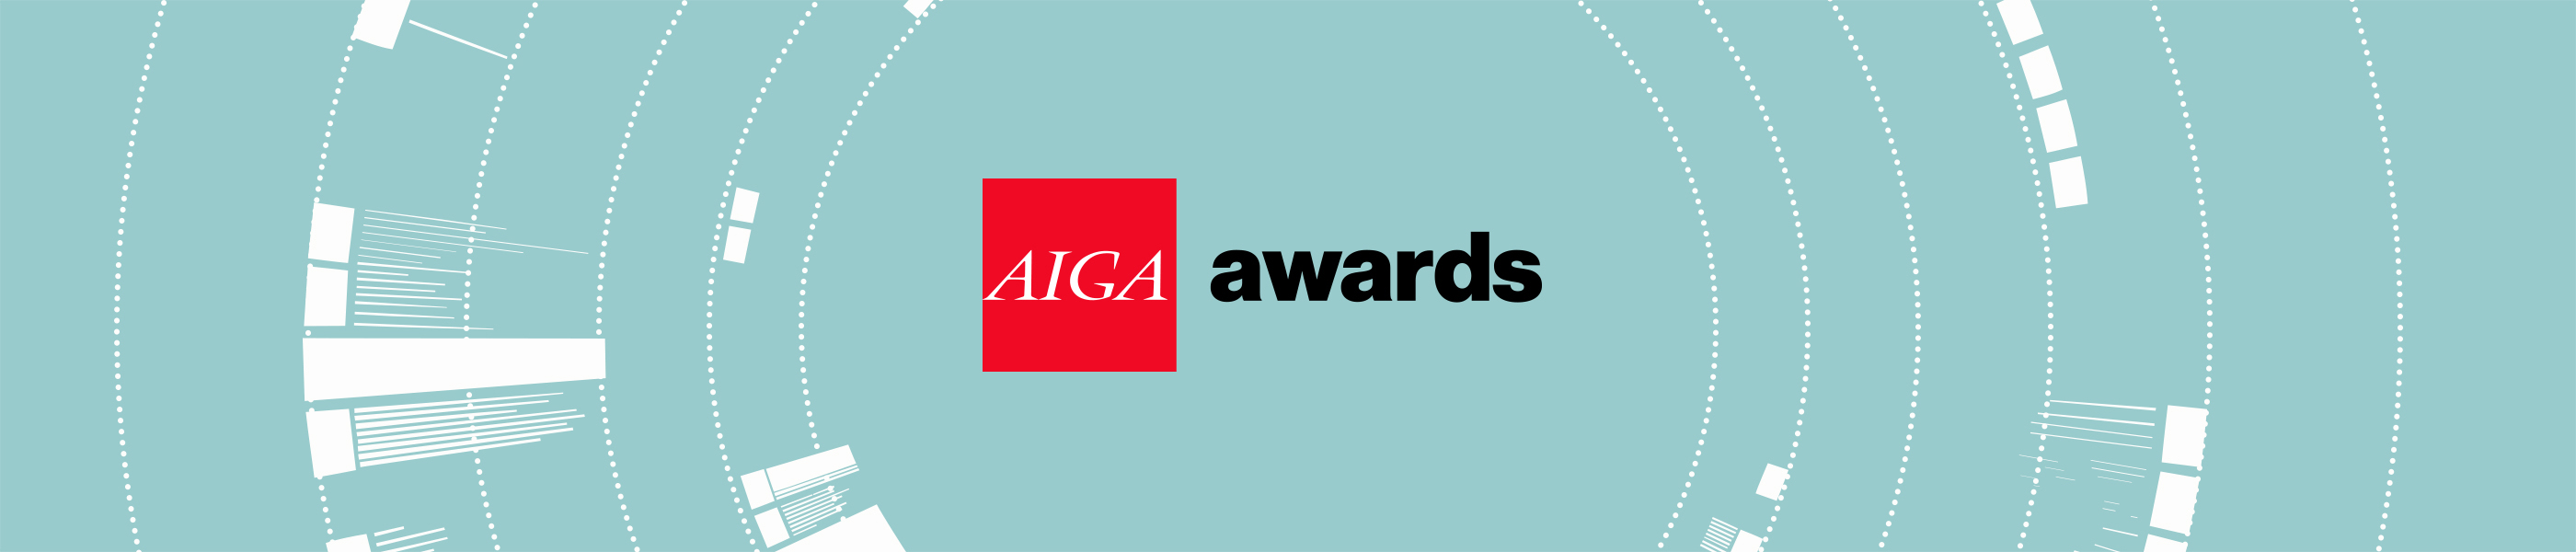 2021 AIGA Awards Celebratrion logo, AIGA in white letters in a square box followed by the word awards in black type against a light turquoise background with radiating circles that resemble a camera lens